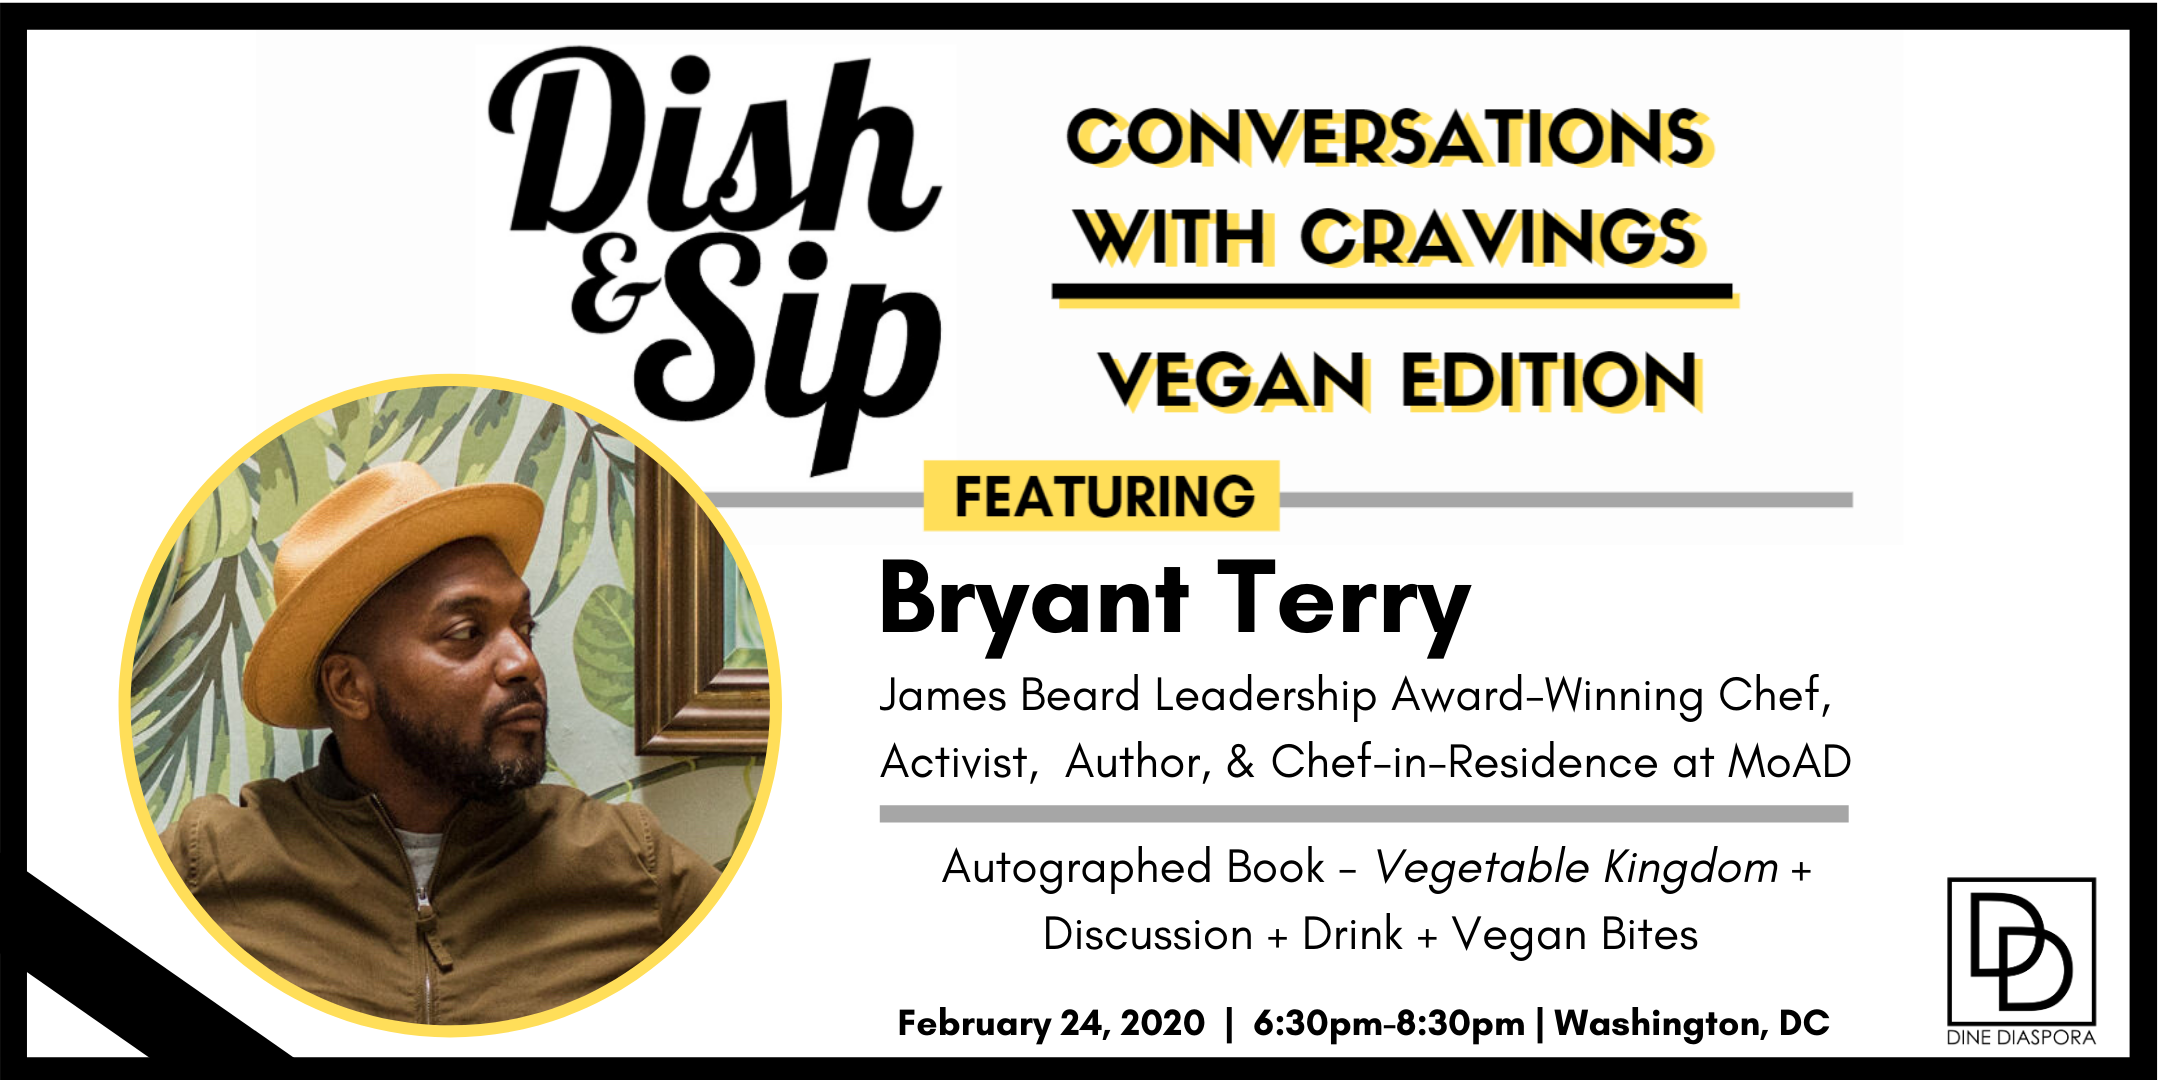 Dish & Sip: Conversations with Cravings